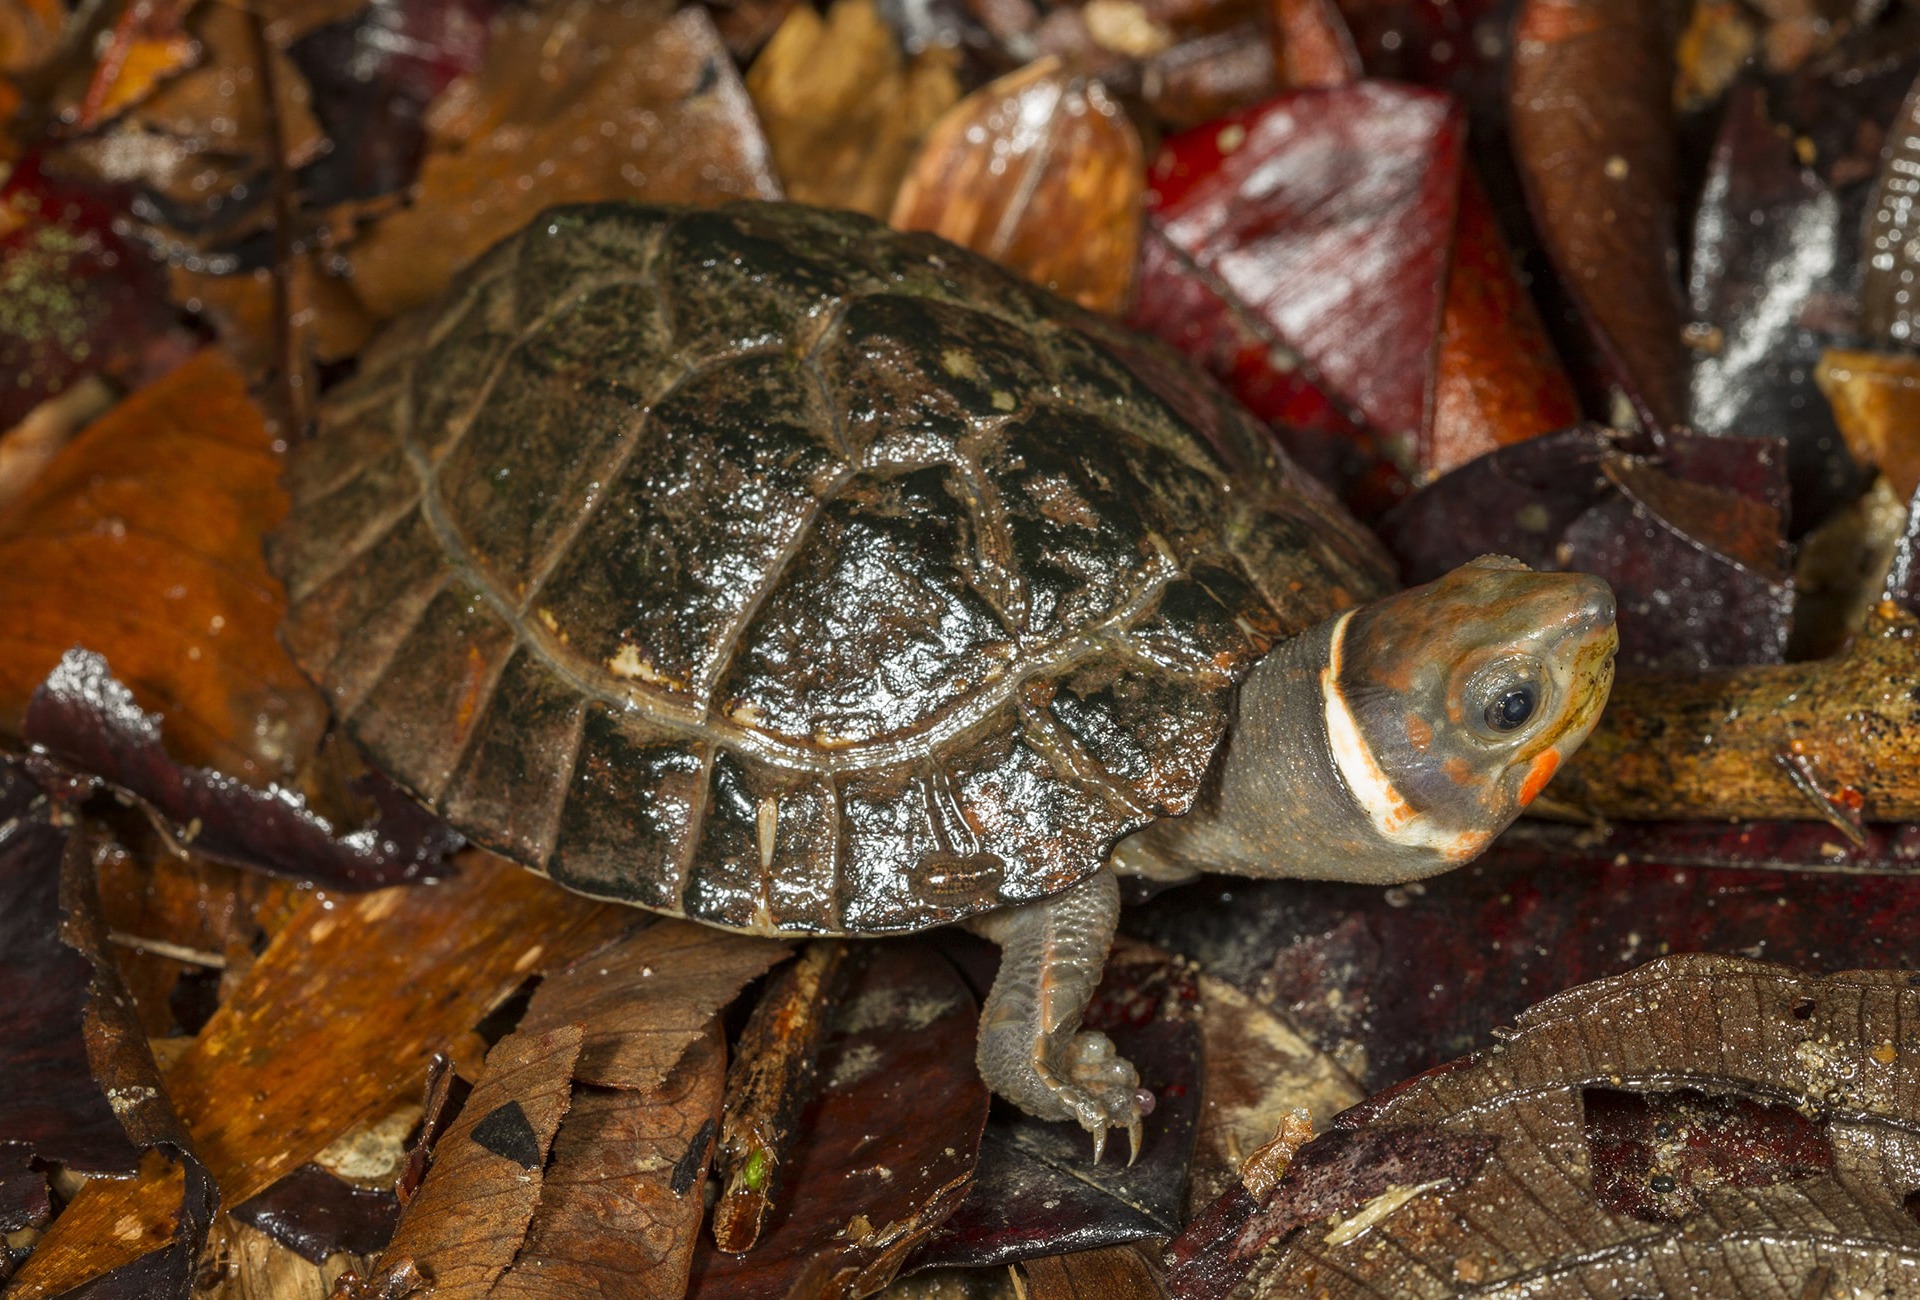 Why is Philippine forest turtle endangered? 2